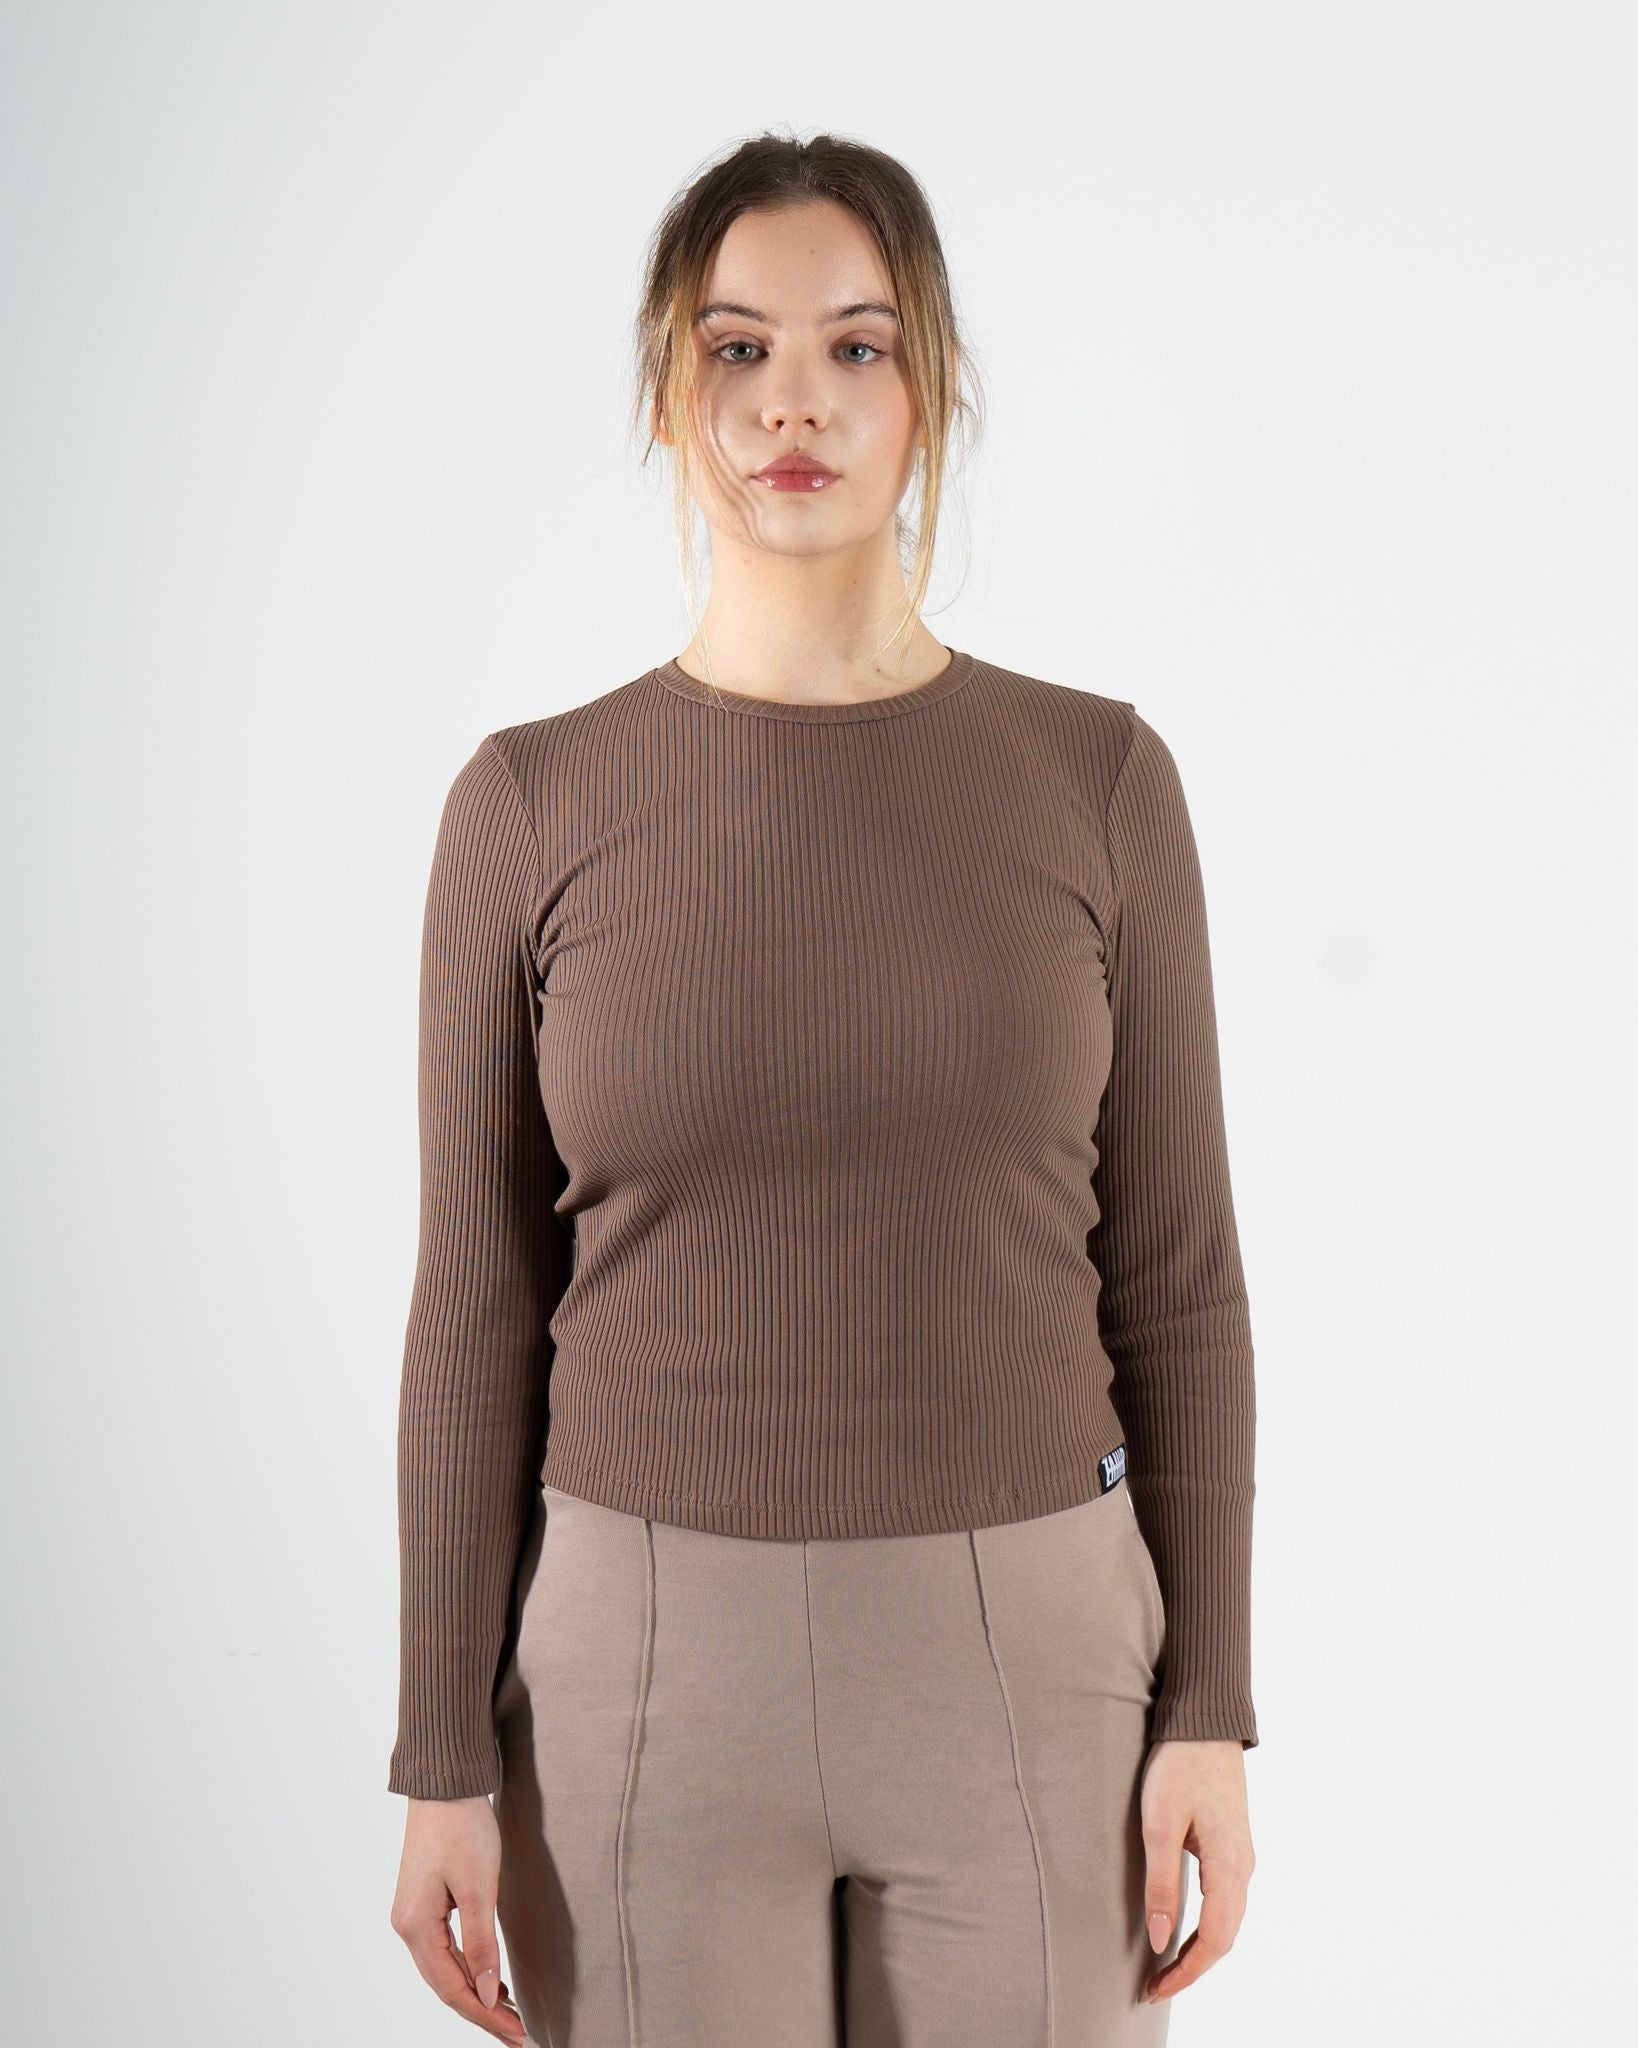 RIBBED BODY - BROWN